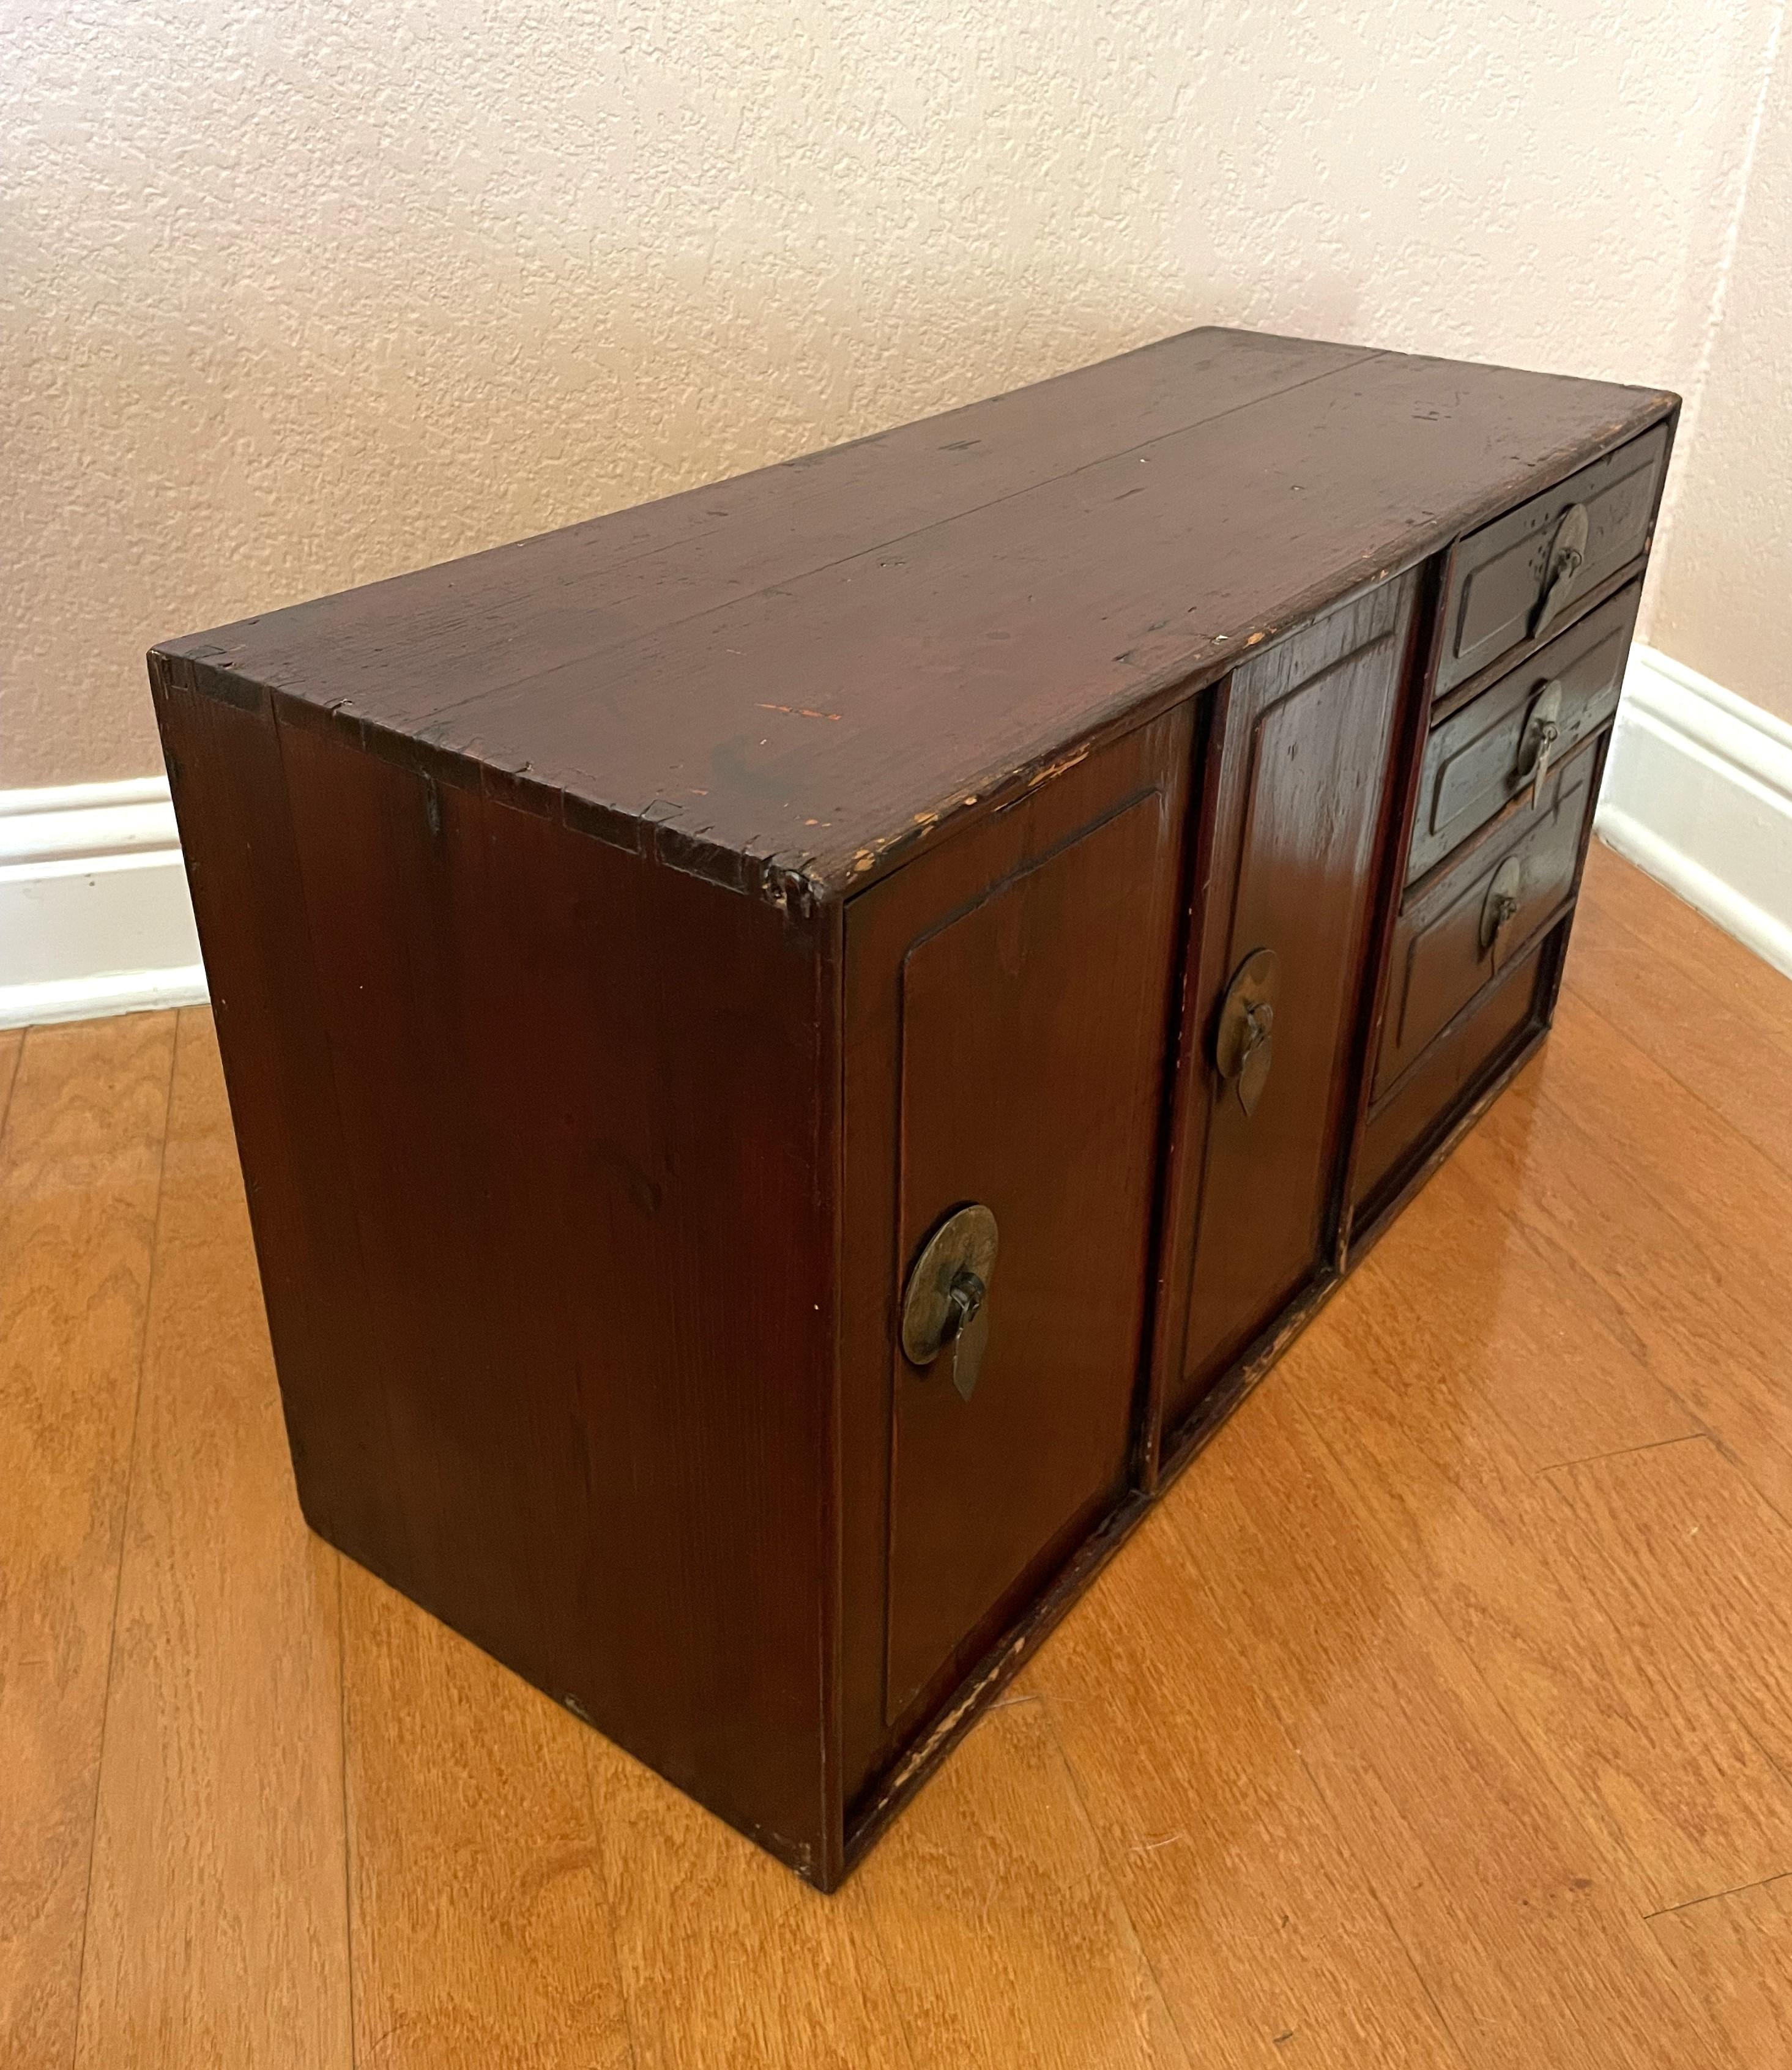 Early 20th-Century Antique Japanese Table-Top Tansu In Excellent Condition For Sale In Austin, TX